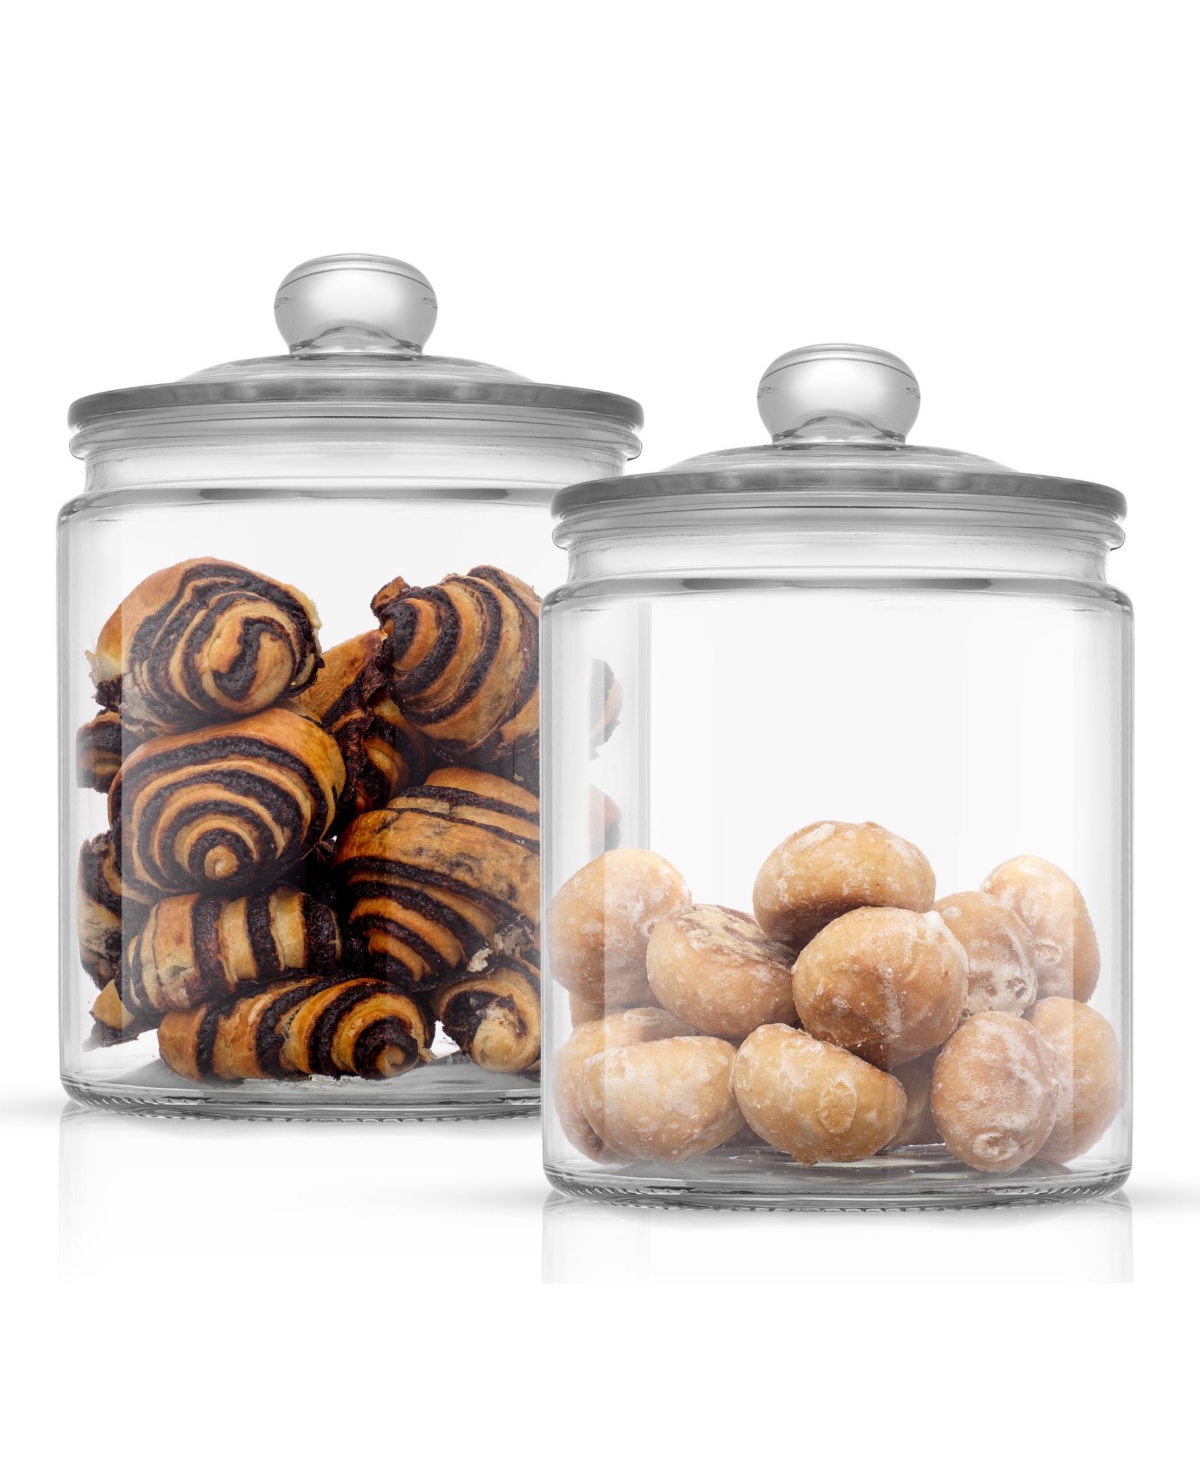 Joyful Round Glass Cookie Jar with Airtight Lids, Set of 2 - Clear